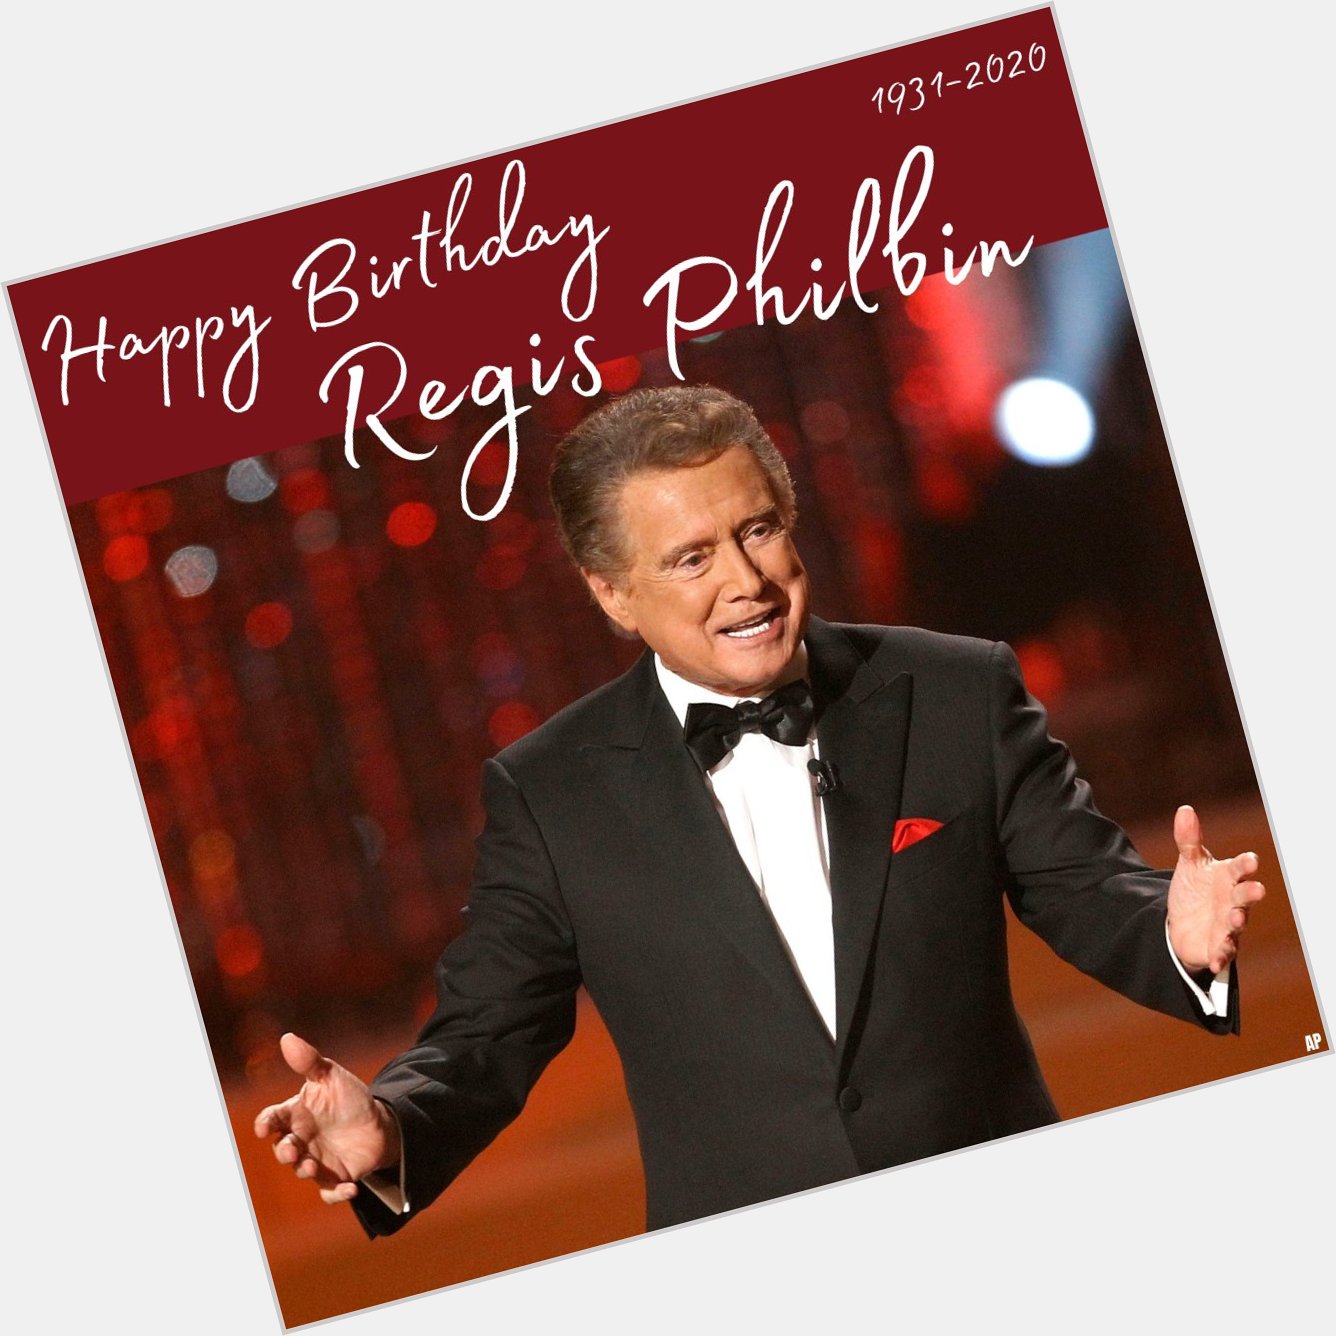 Happy birthday to Regis Philbin! The iconic TV host would have been 90 today. 